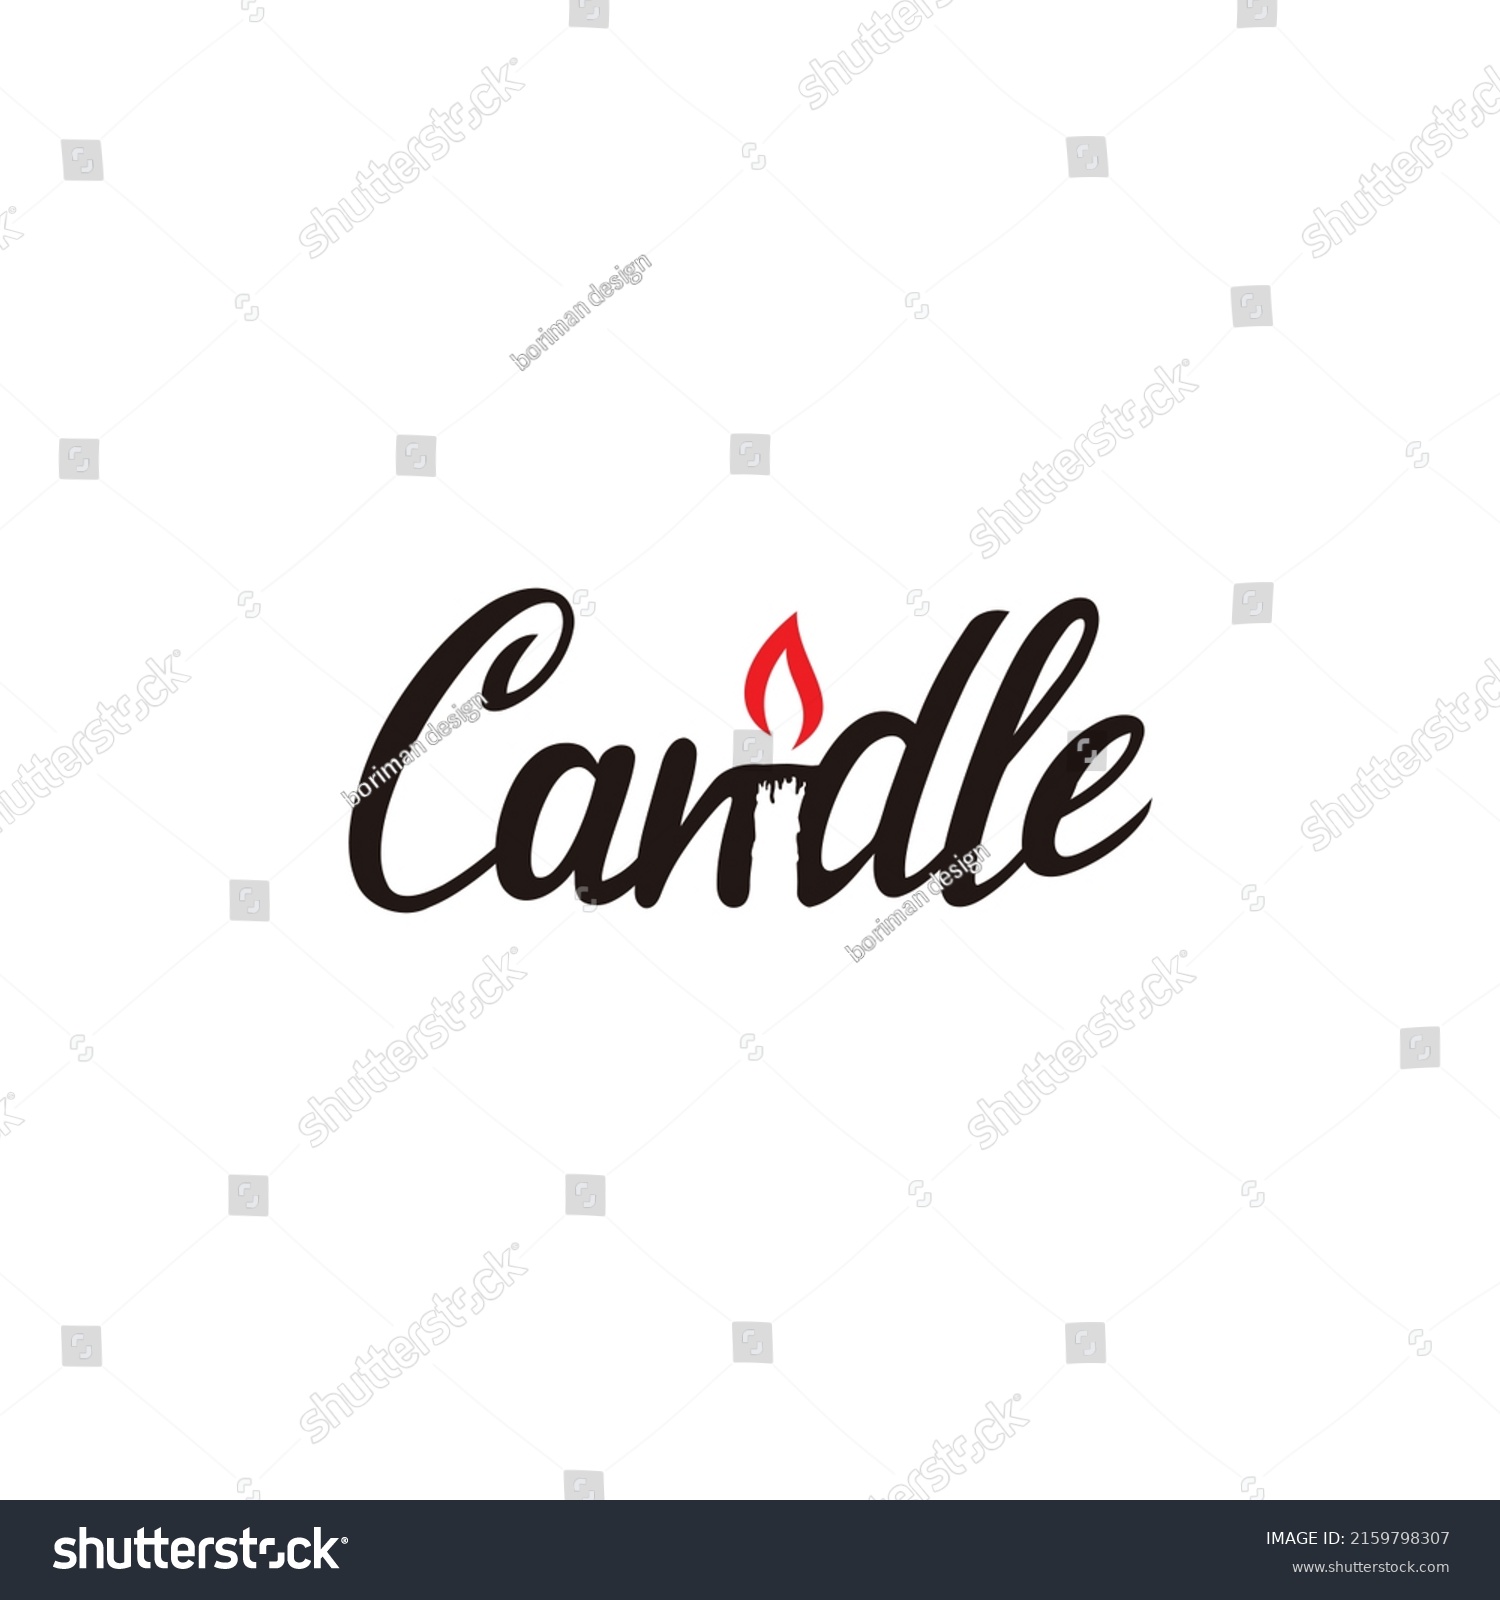 SVG of Candle logo design. Vector illustration of typography candle text. modern logo design vector icon template
 svg